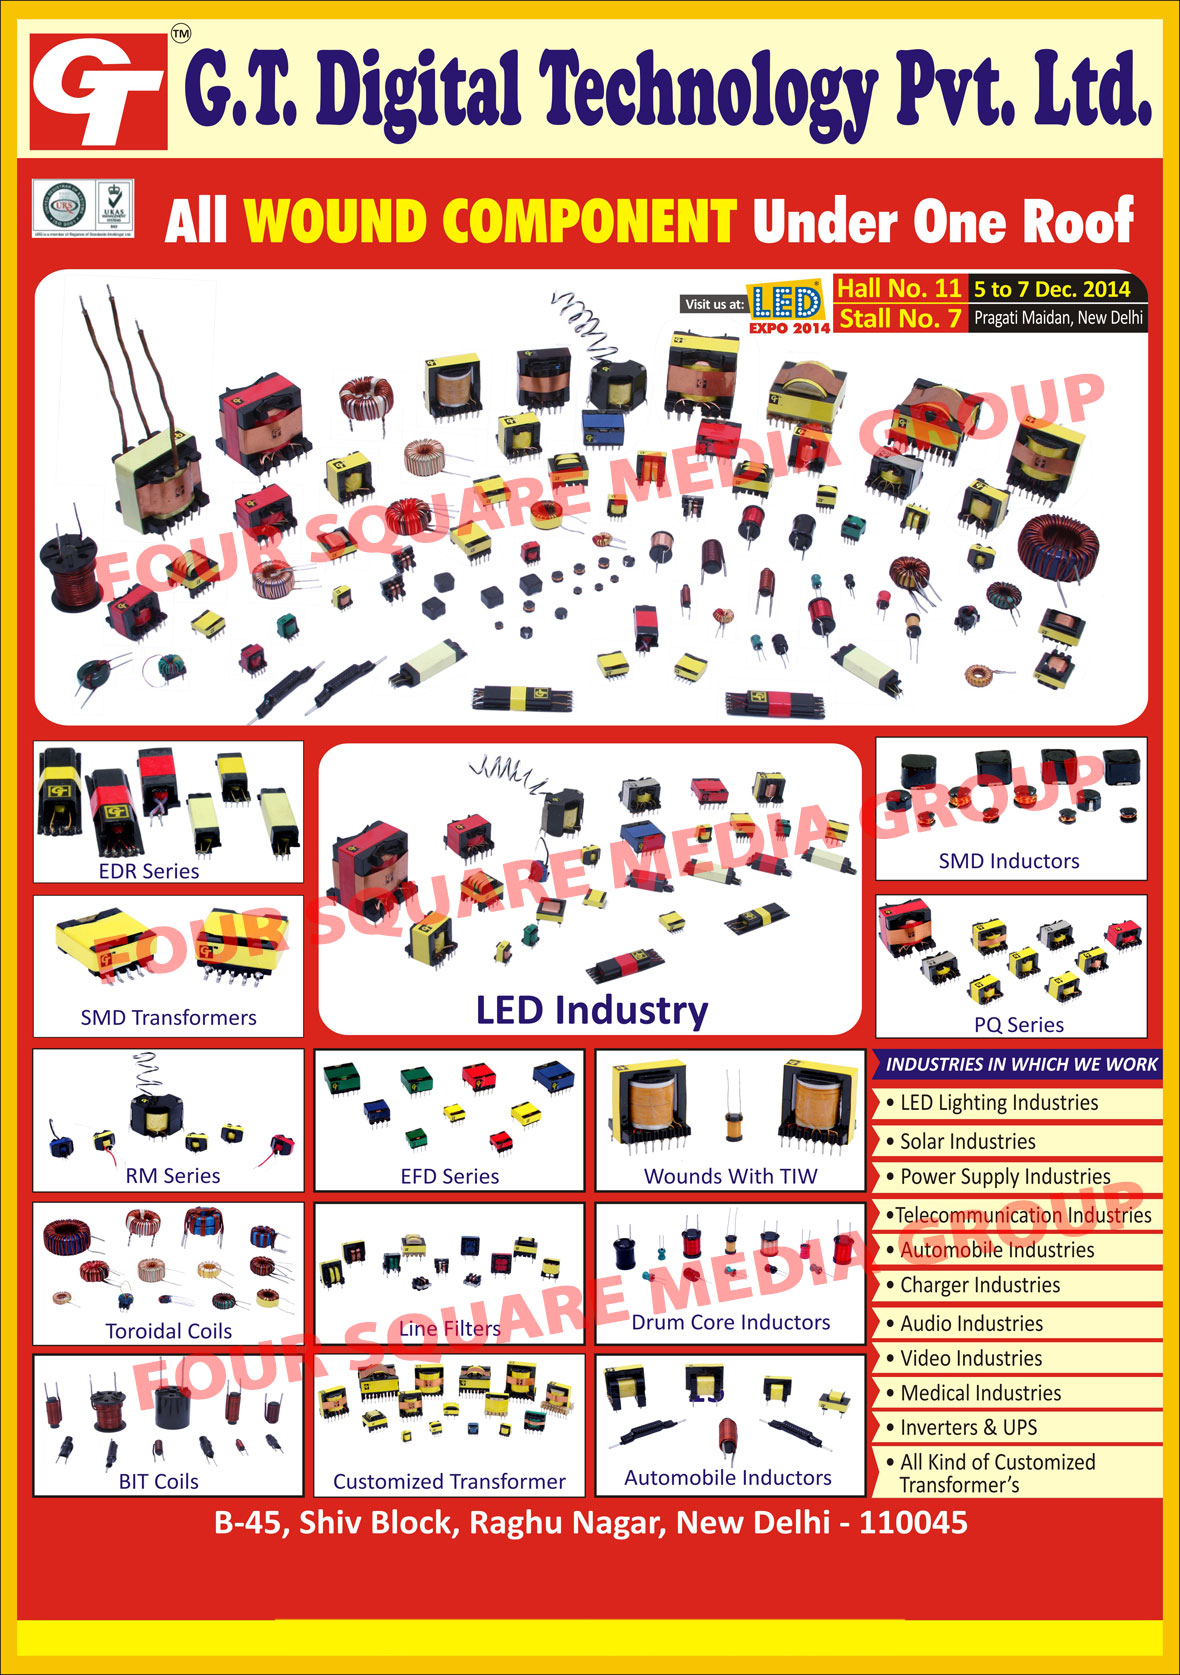 Wound Components EDR Series, SMD Transformers, Wound Components RM Series, Toroidal Coils, BIT Coils, Wound Components EFD Series, Line Filters, Customized Transformers, Drum Core Inductors, Automotive Inductors, SMD Inductors, Wound Components PQ Series,Led Lighting Ferrite Transformers, Solar Lighting Ferrite Transformers, CFL Ferrite Transformers, Ballast Ferrite Transformers, Inductors, Transformer